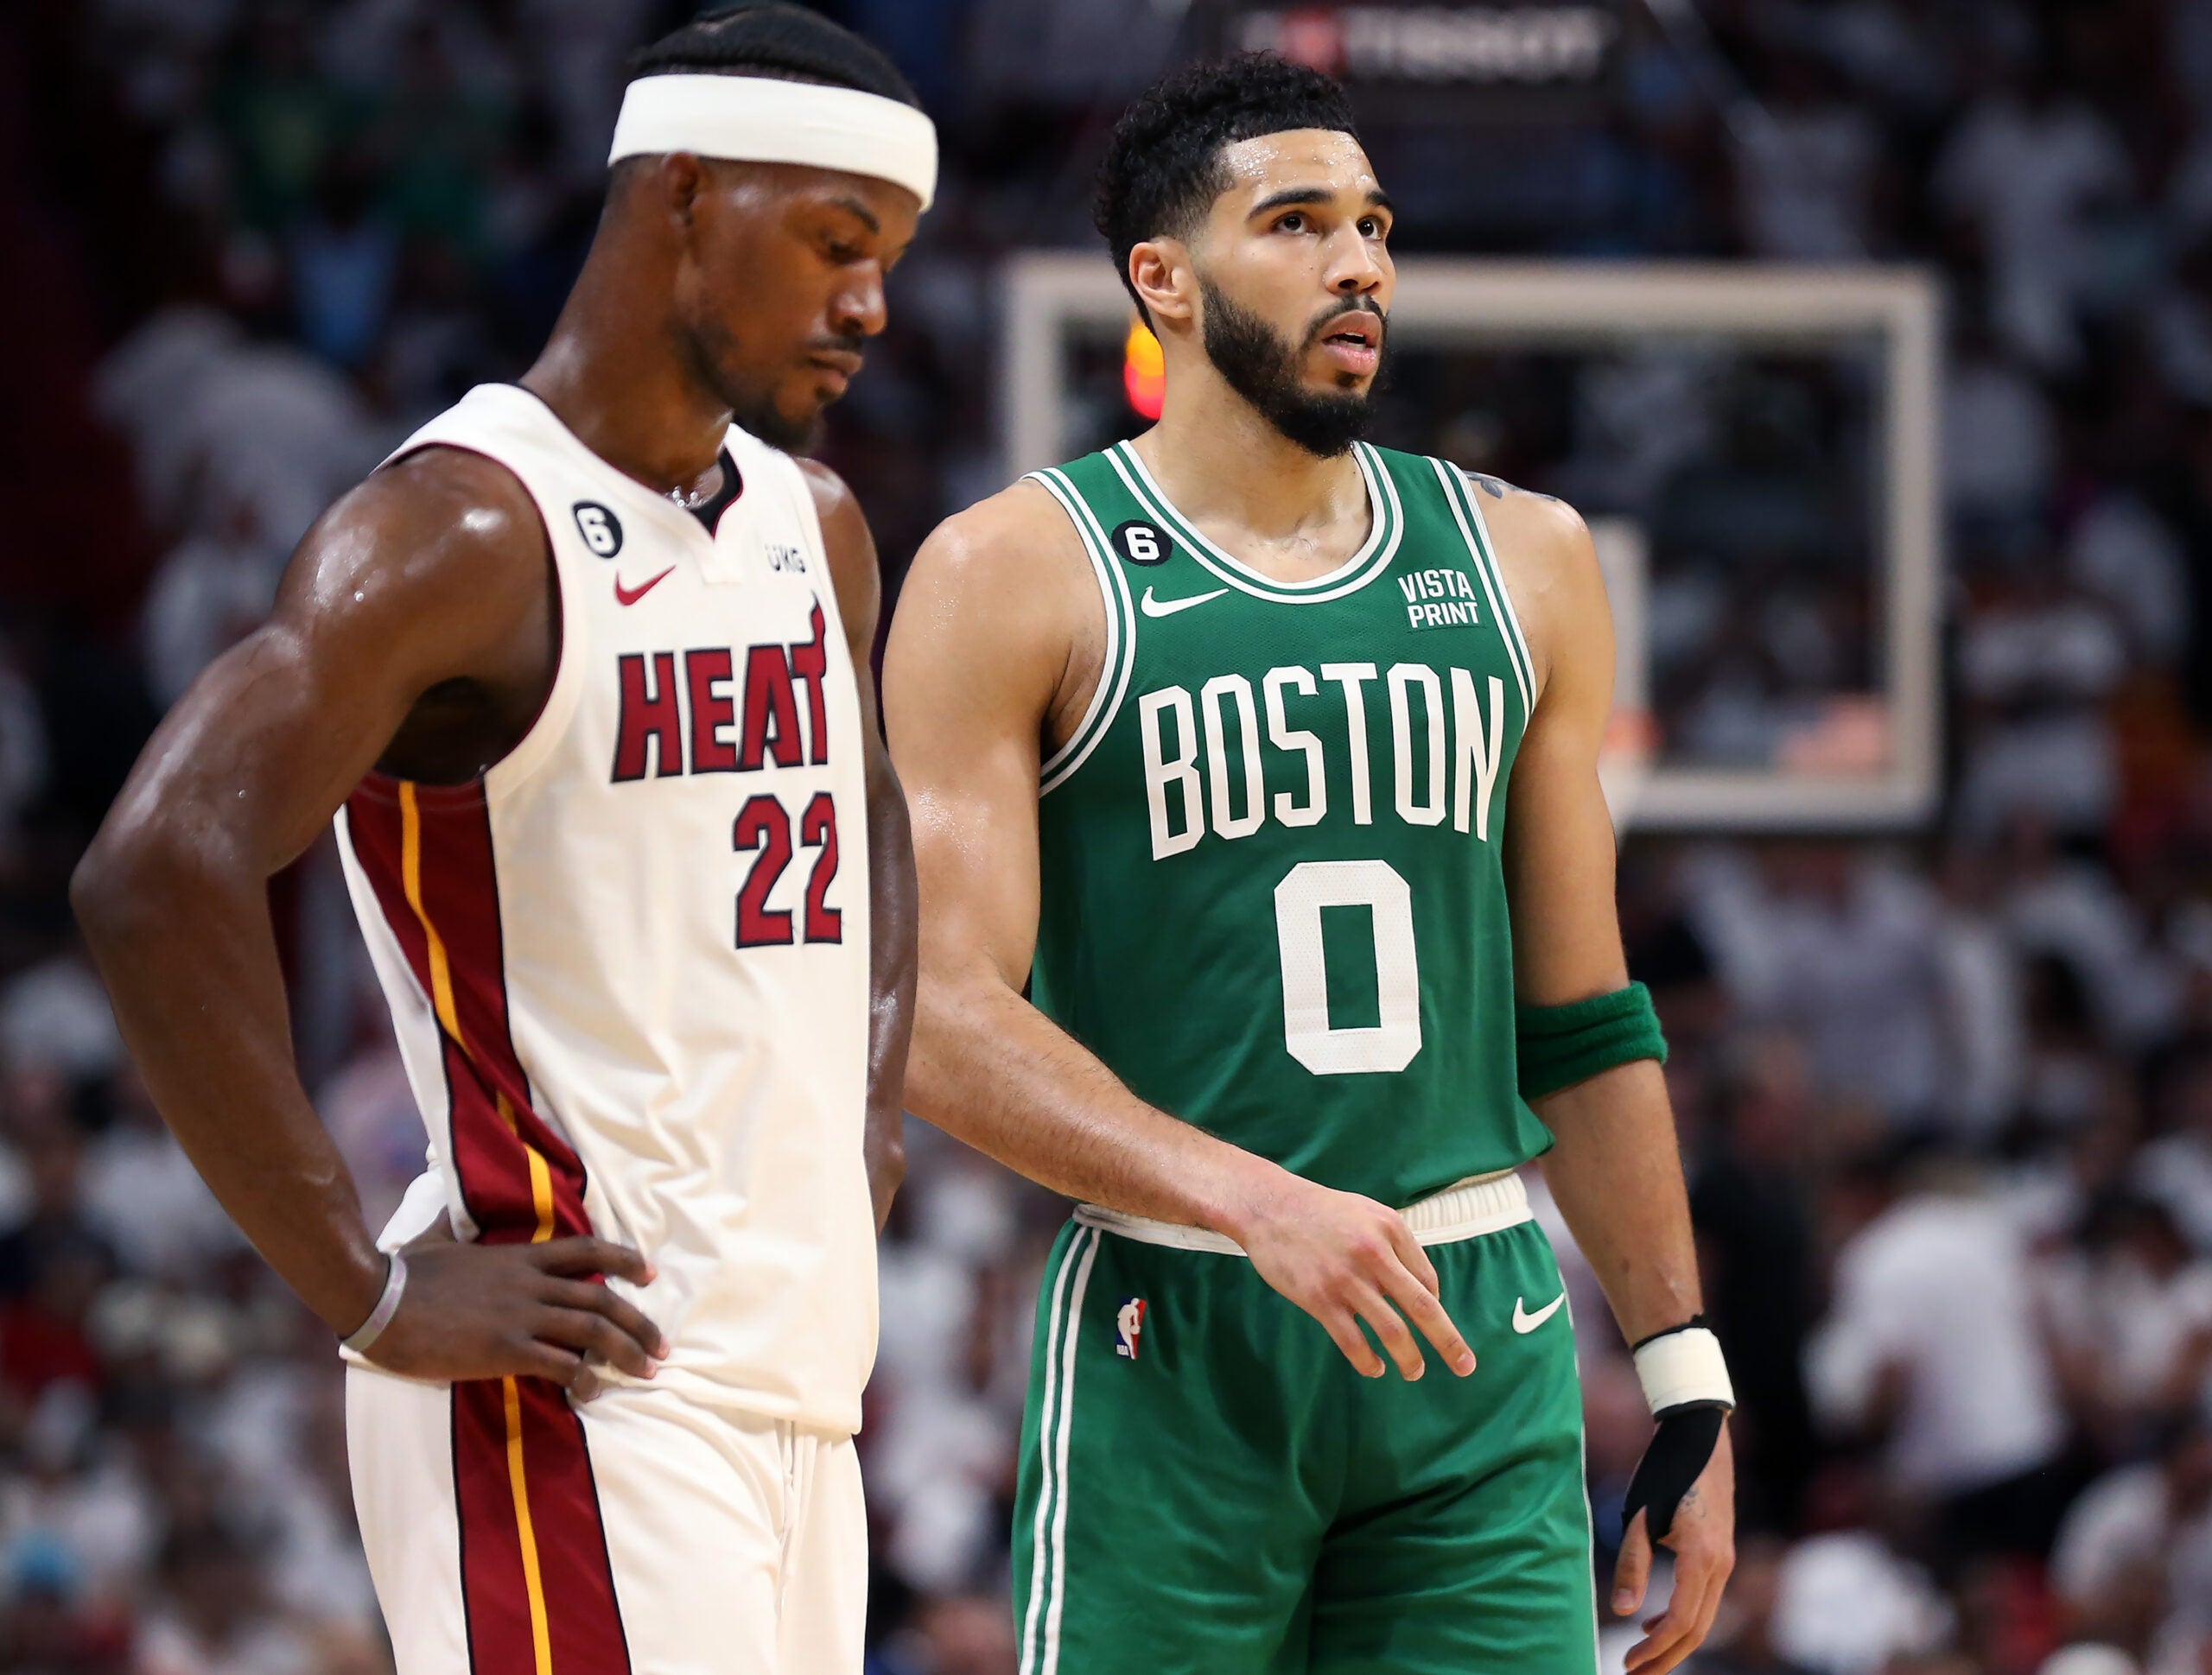 Miami's Jimmy Butler (left) and the Celtics Jayson Tatum (right) are pictured during a late fourth quarter free throw by Boston.